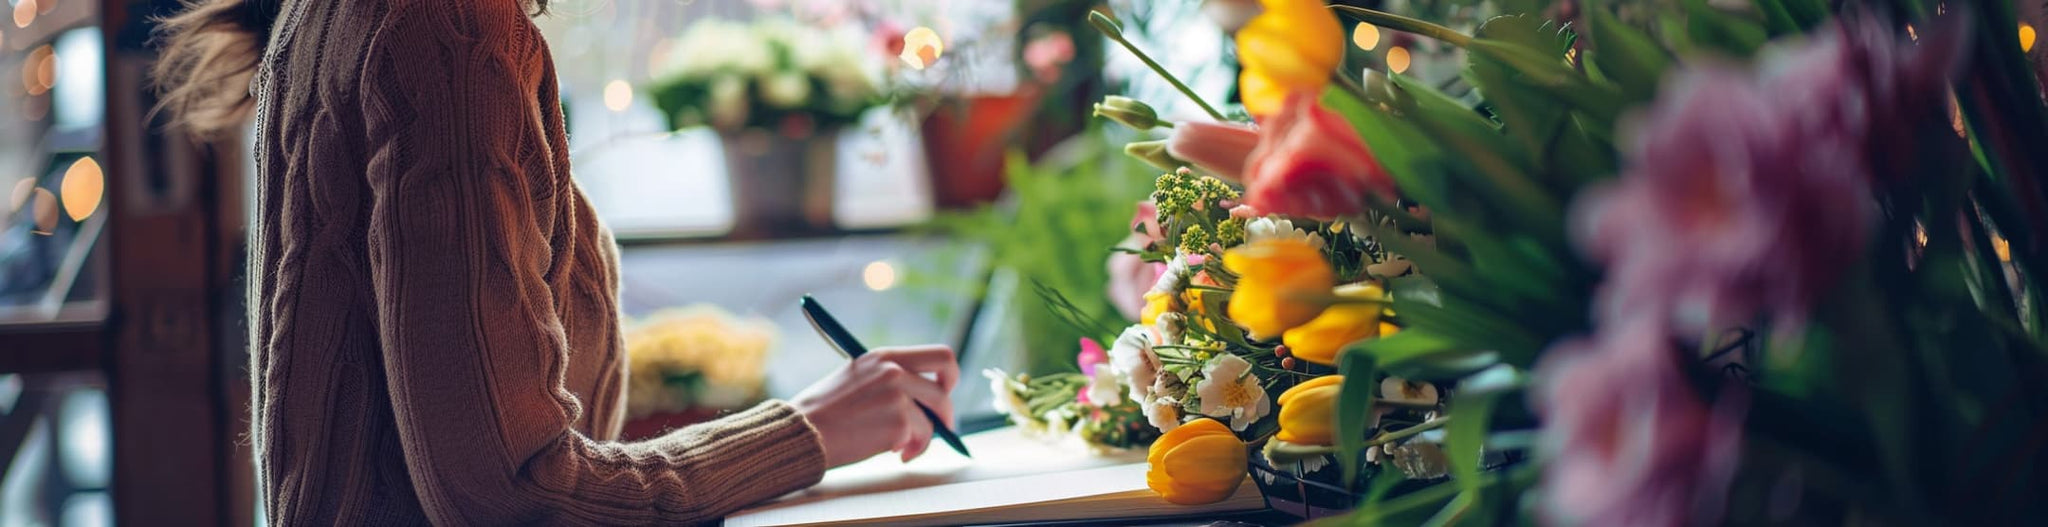 person at a café with a floral arrangement, writing about Spring festivals